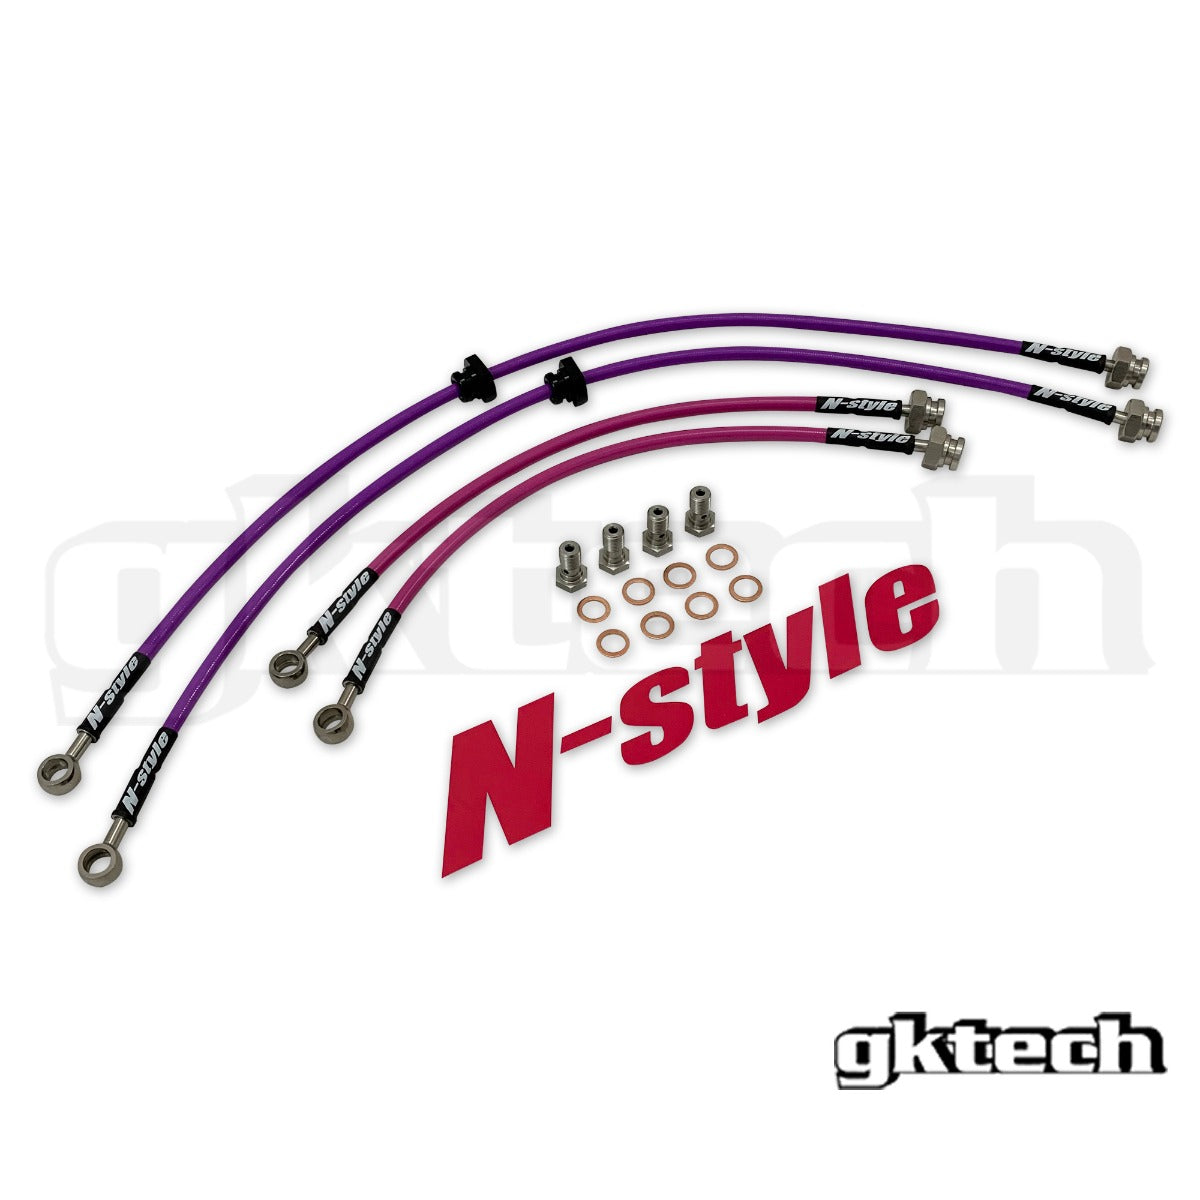 S14 240sx/S15 Silvia braided brake lines (Front & Rear set)